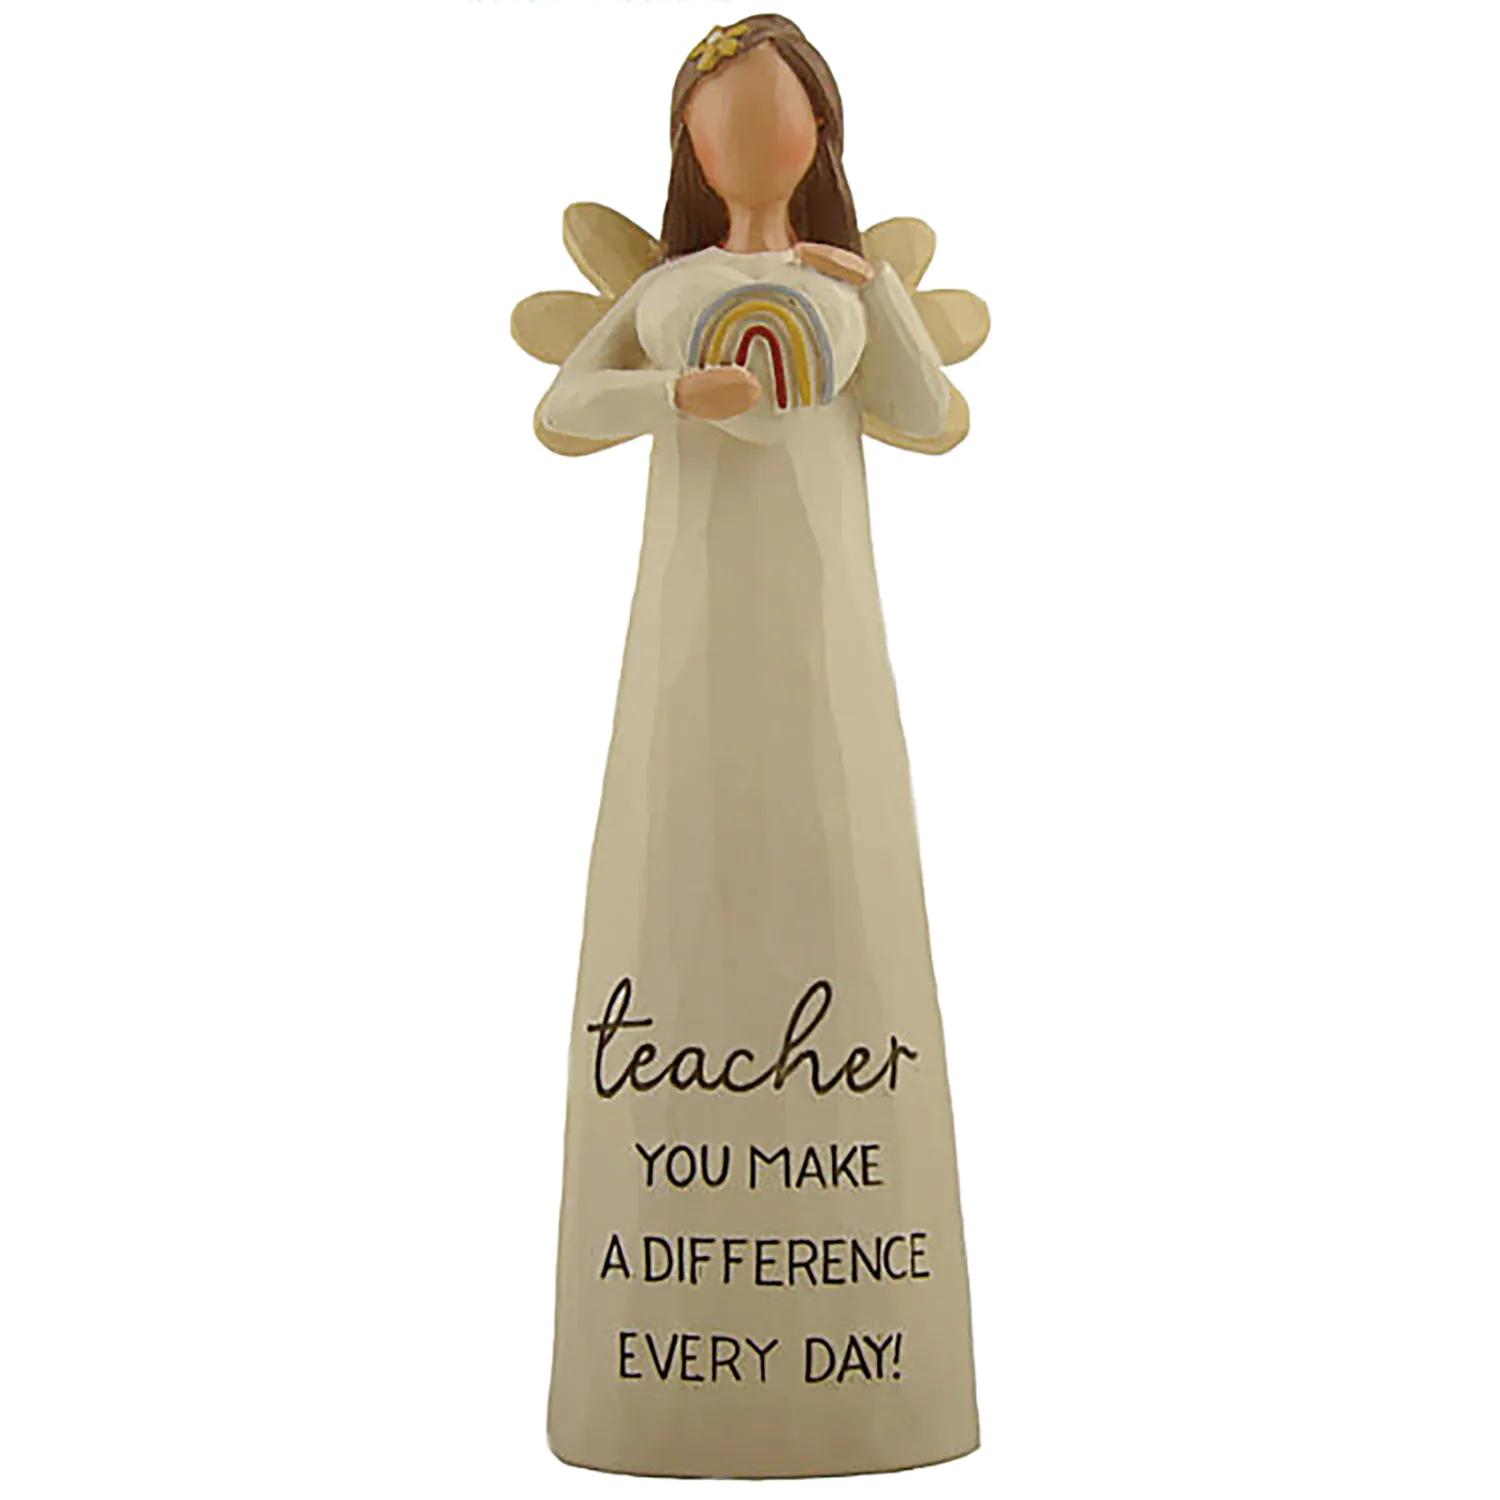 Figurine Manufactures Resin Angel Crafts Bright Blessings Angel Statue w heart - Teacher for Teachers' Day Gift 231-13581